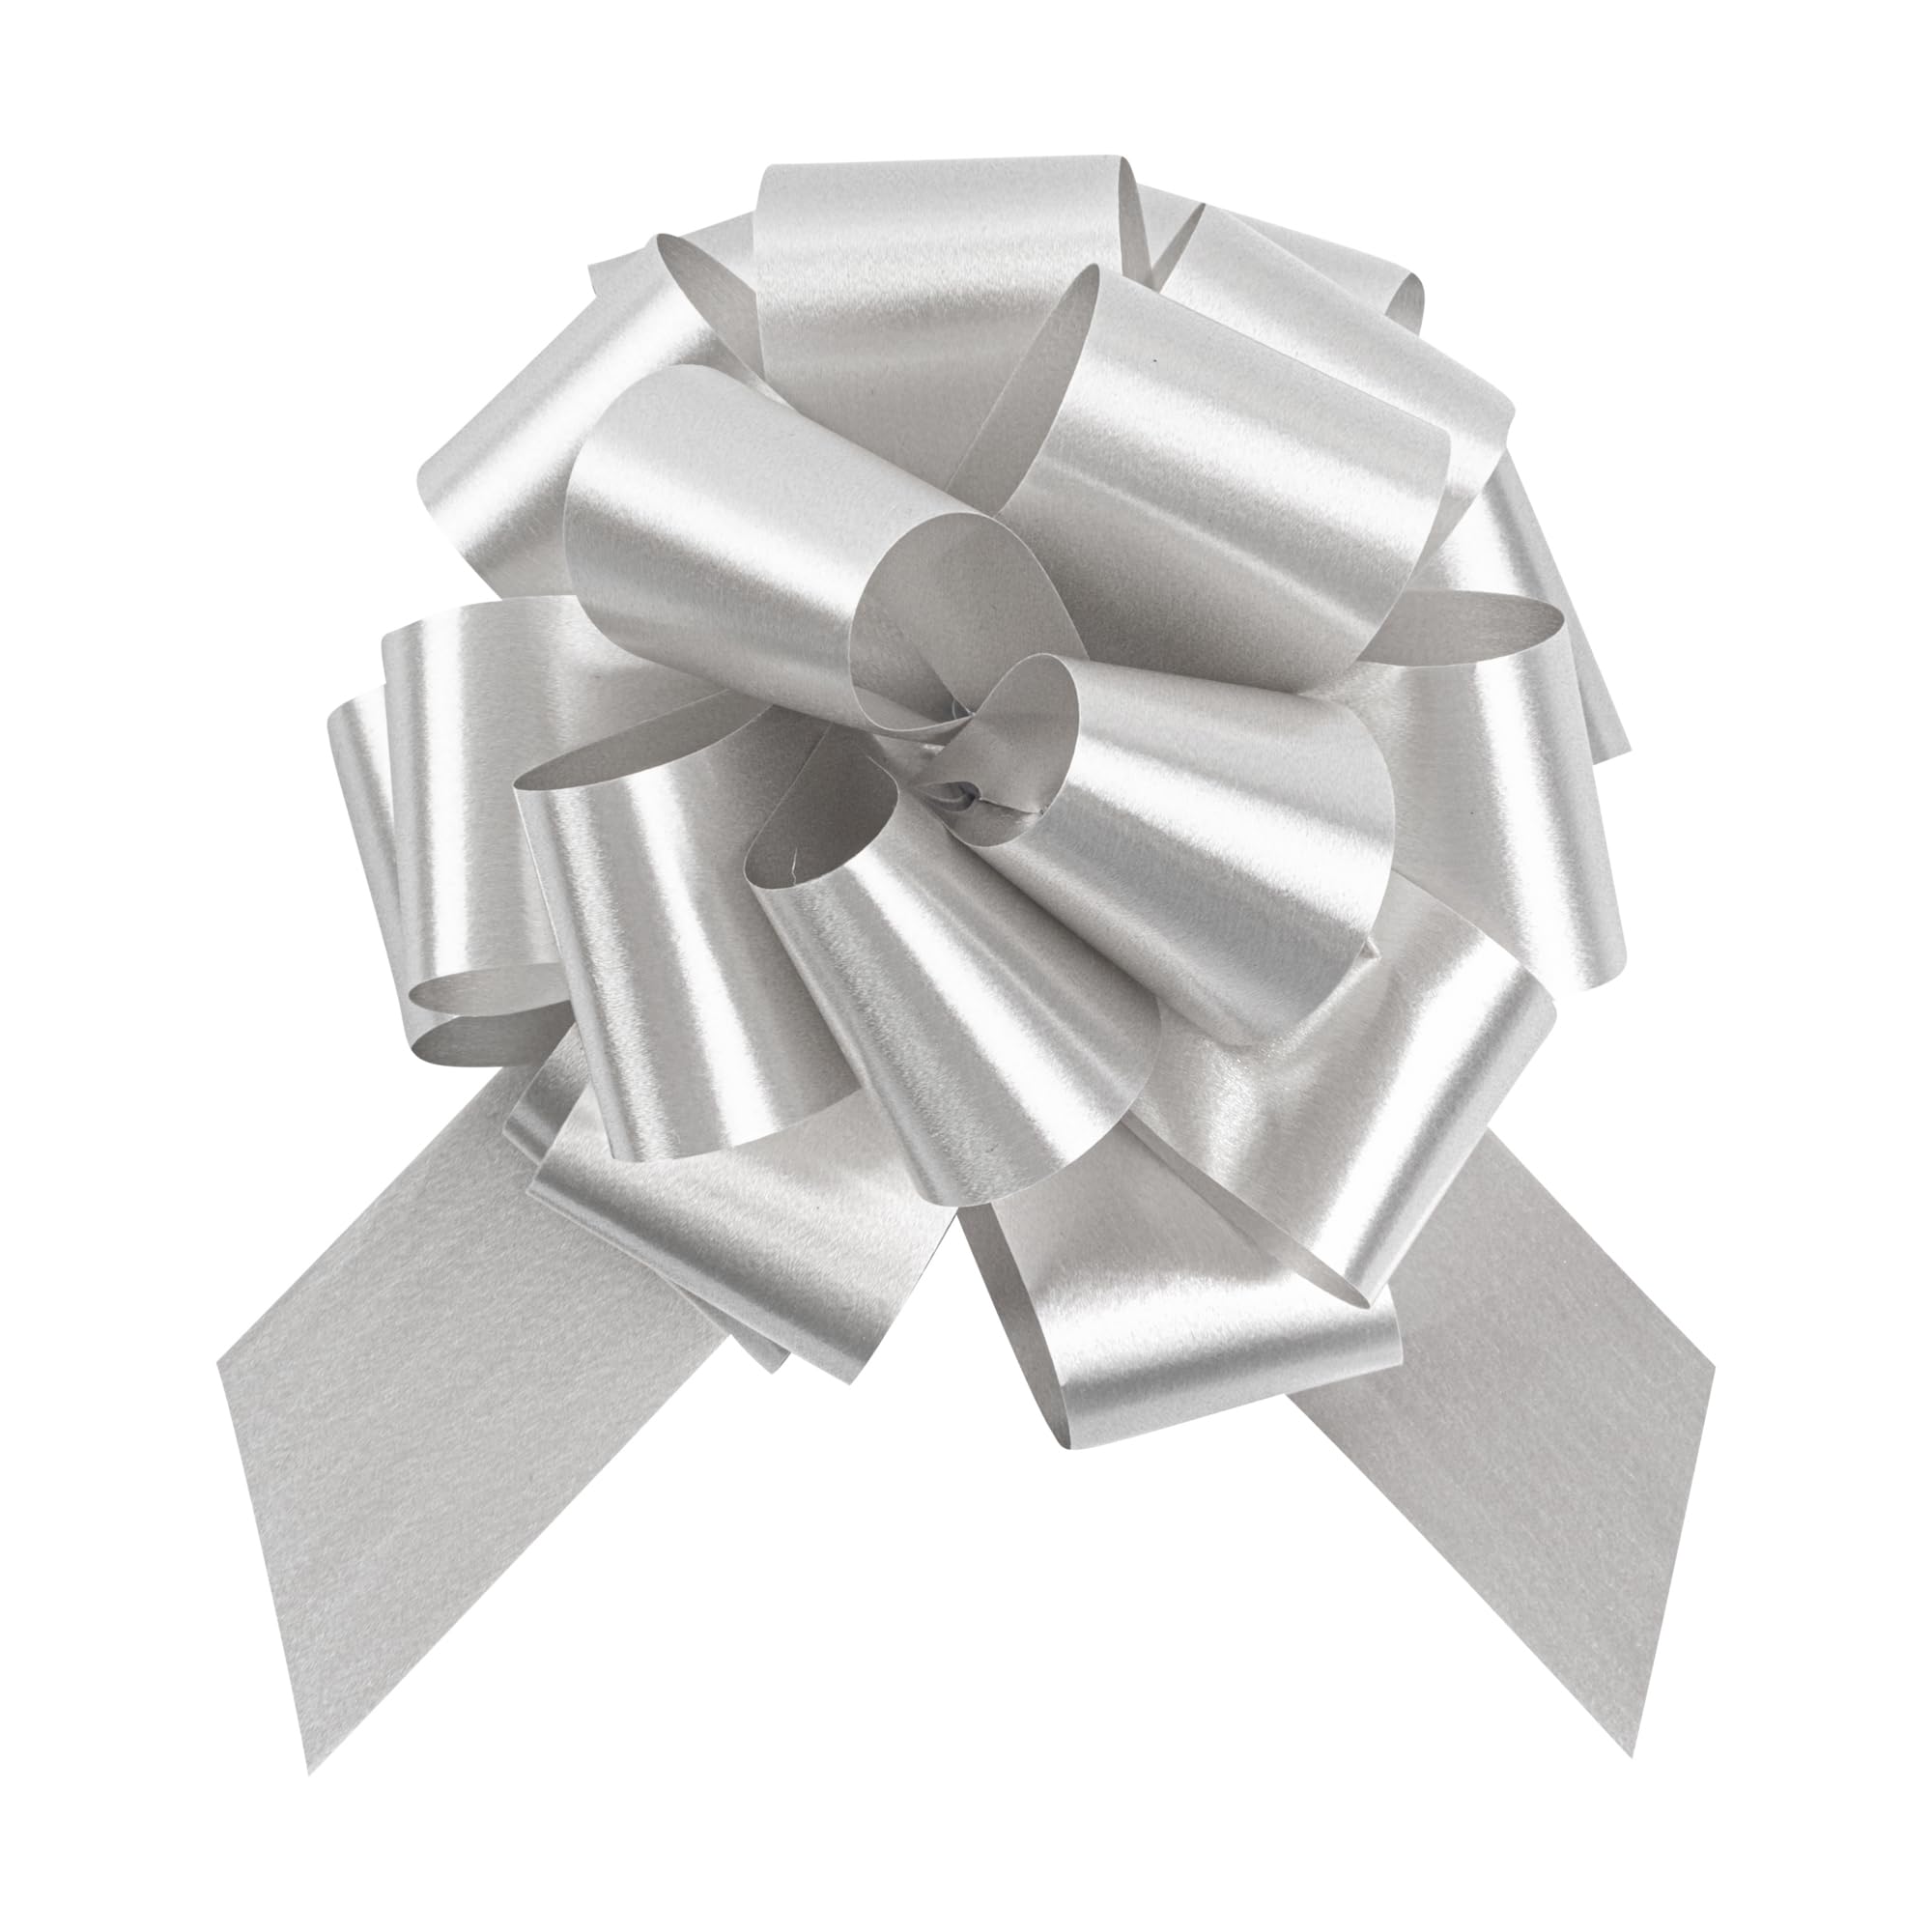 Gift Tek 5.5 Inch Ribbon Pull Bows, 10 Satin Pull Bows - 20 Loops, Instant, Silver Plastic Flower Bows For Gifts, Large, Instant Bows, For Wedding Gift Baskets, Wraps - Restaurantware